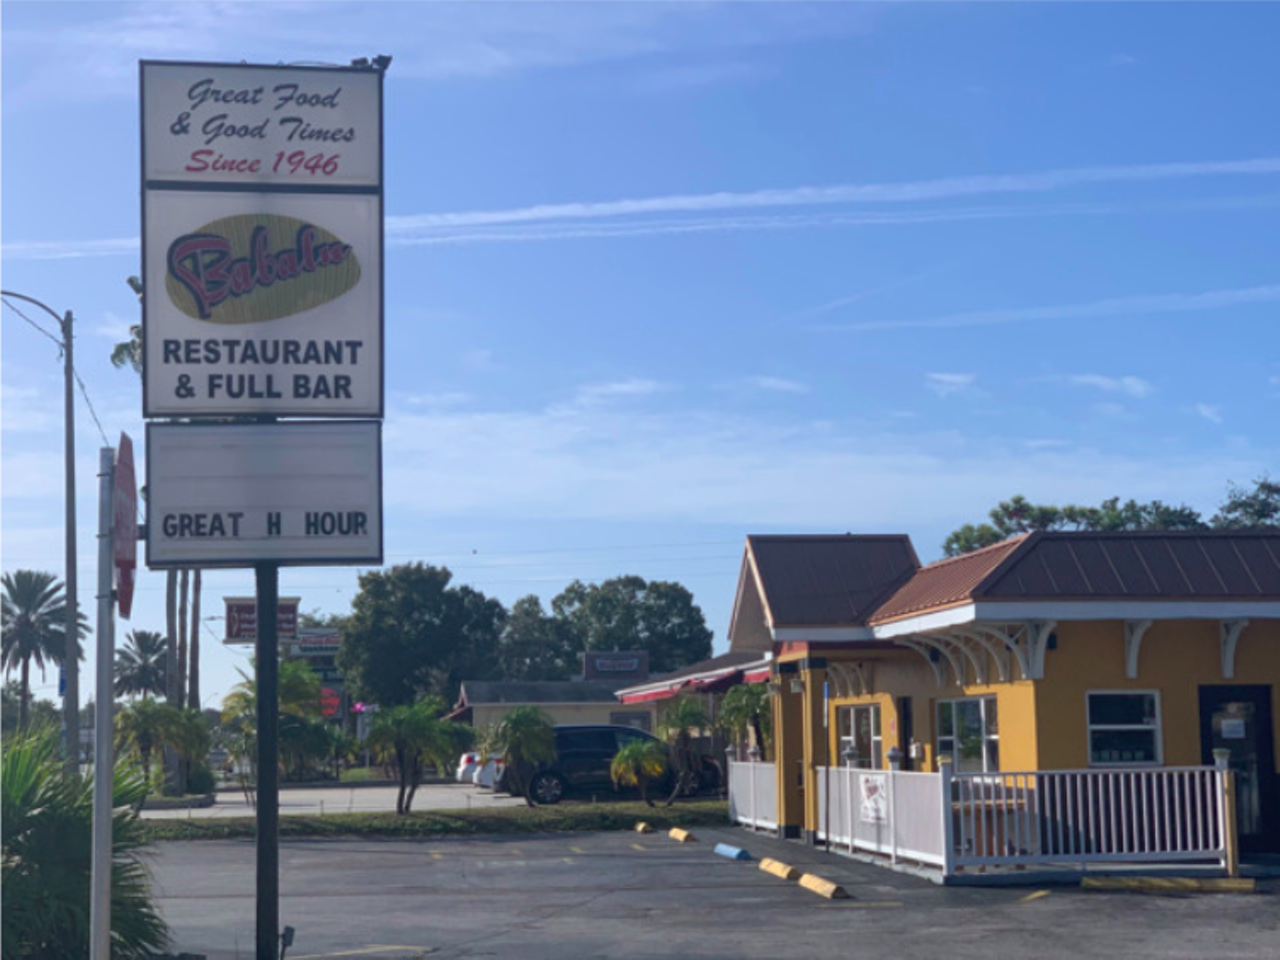 Babalu  
9246 4th St. N, St. Petersburg
Having served classic comfort eats since 1964, family bar and restaurant Babalu closed in January 2020. Known for its classic dishes like jumbo chicken wings, Babalu served locals for more than 30 years before its closing.